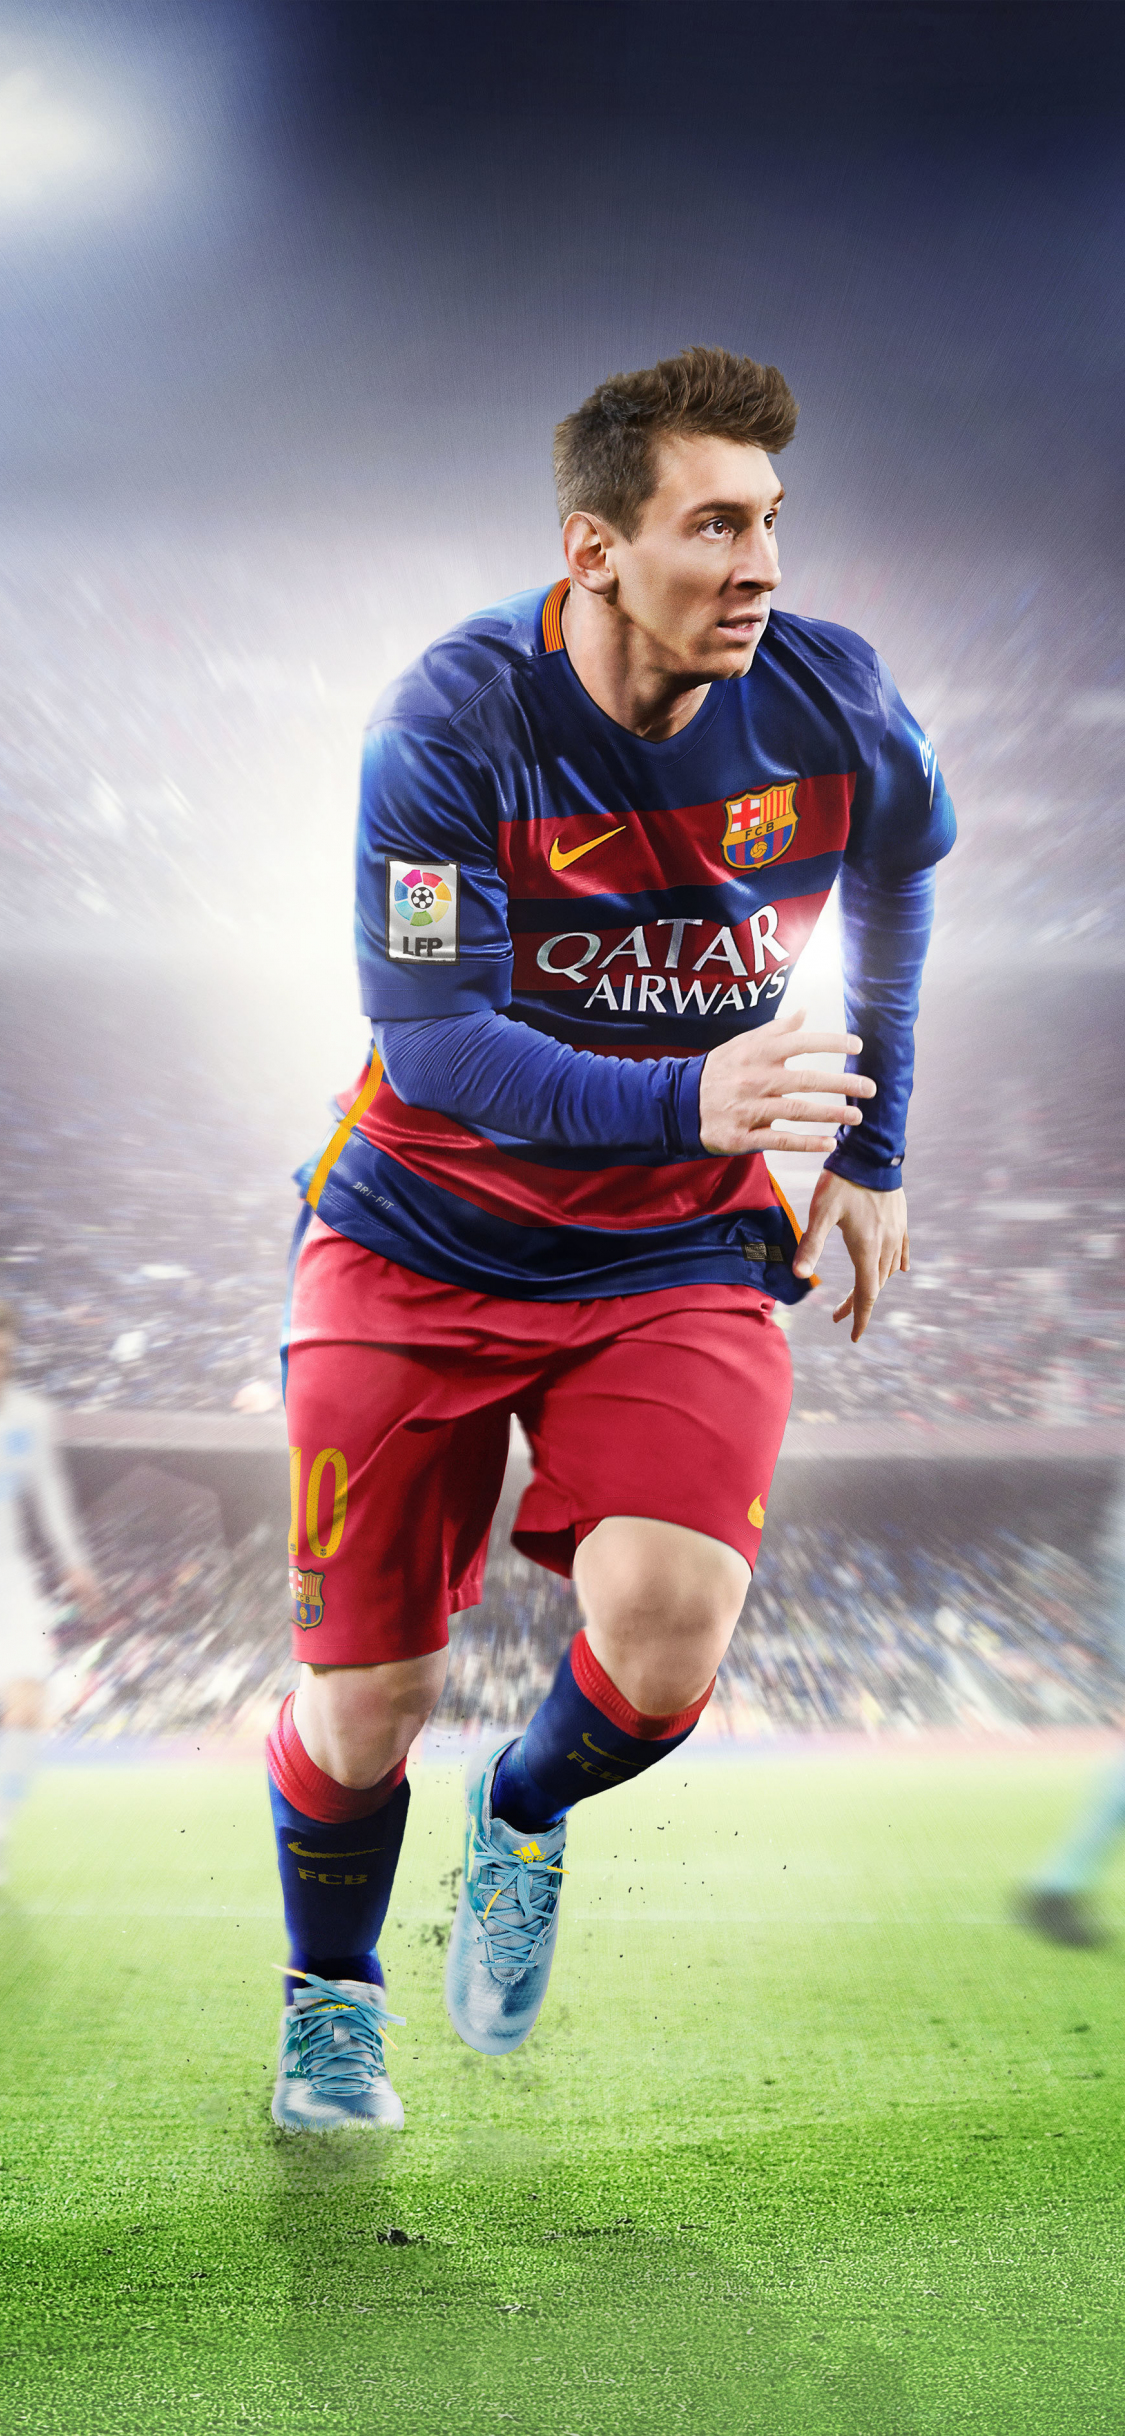 Download wallpaper x lionel messi footballer fifa ea sports video game iphone x x hd background